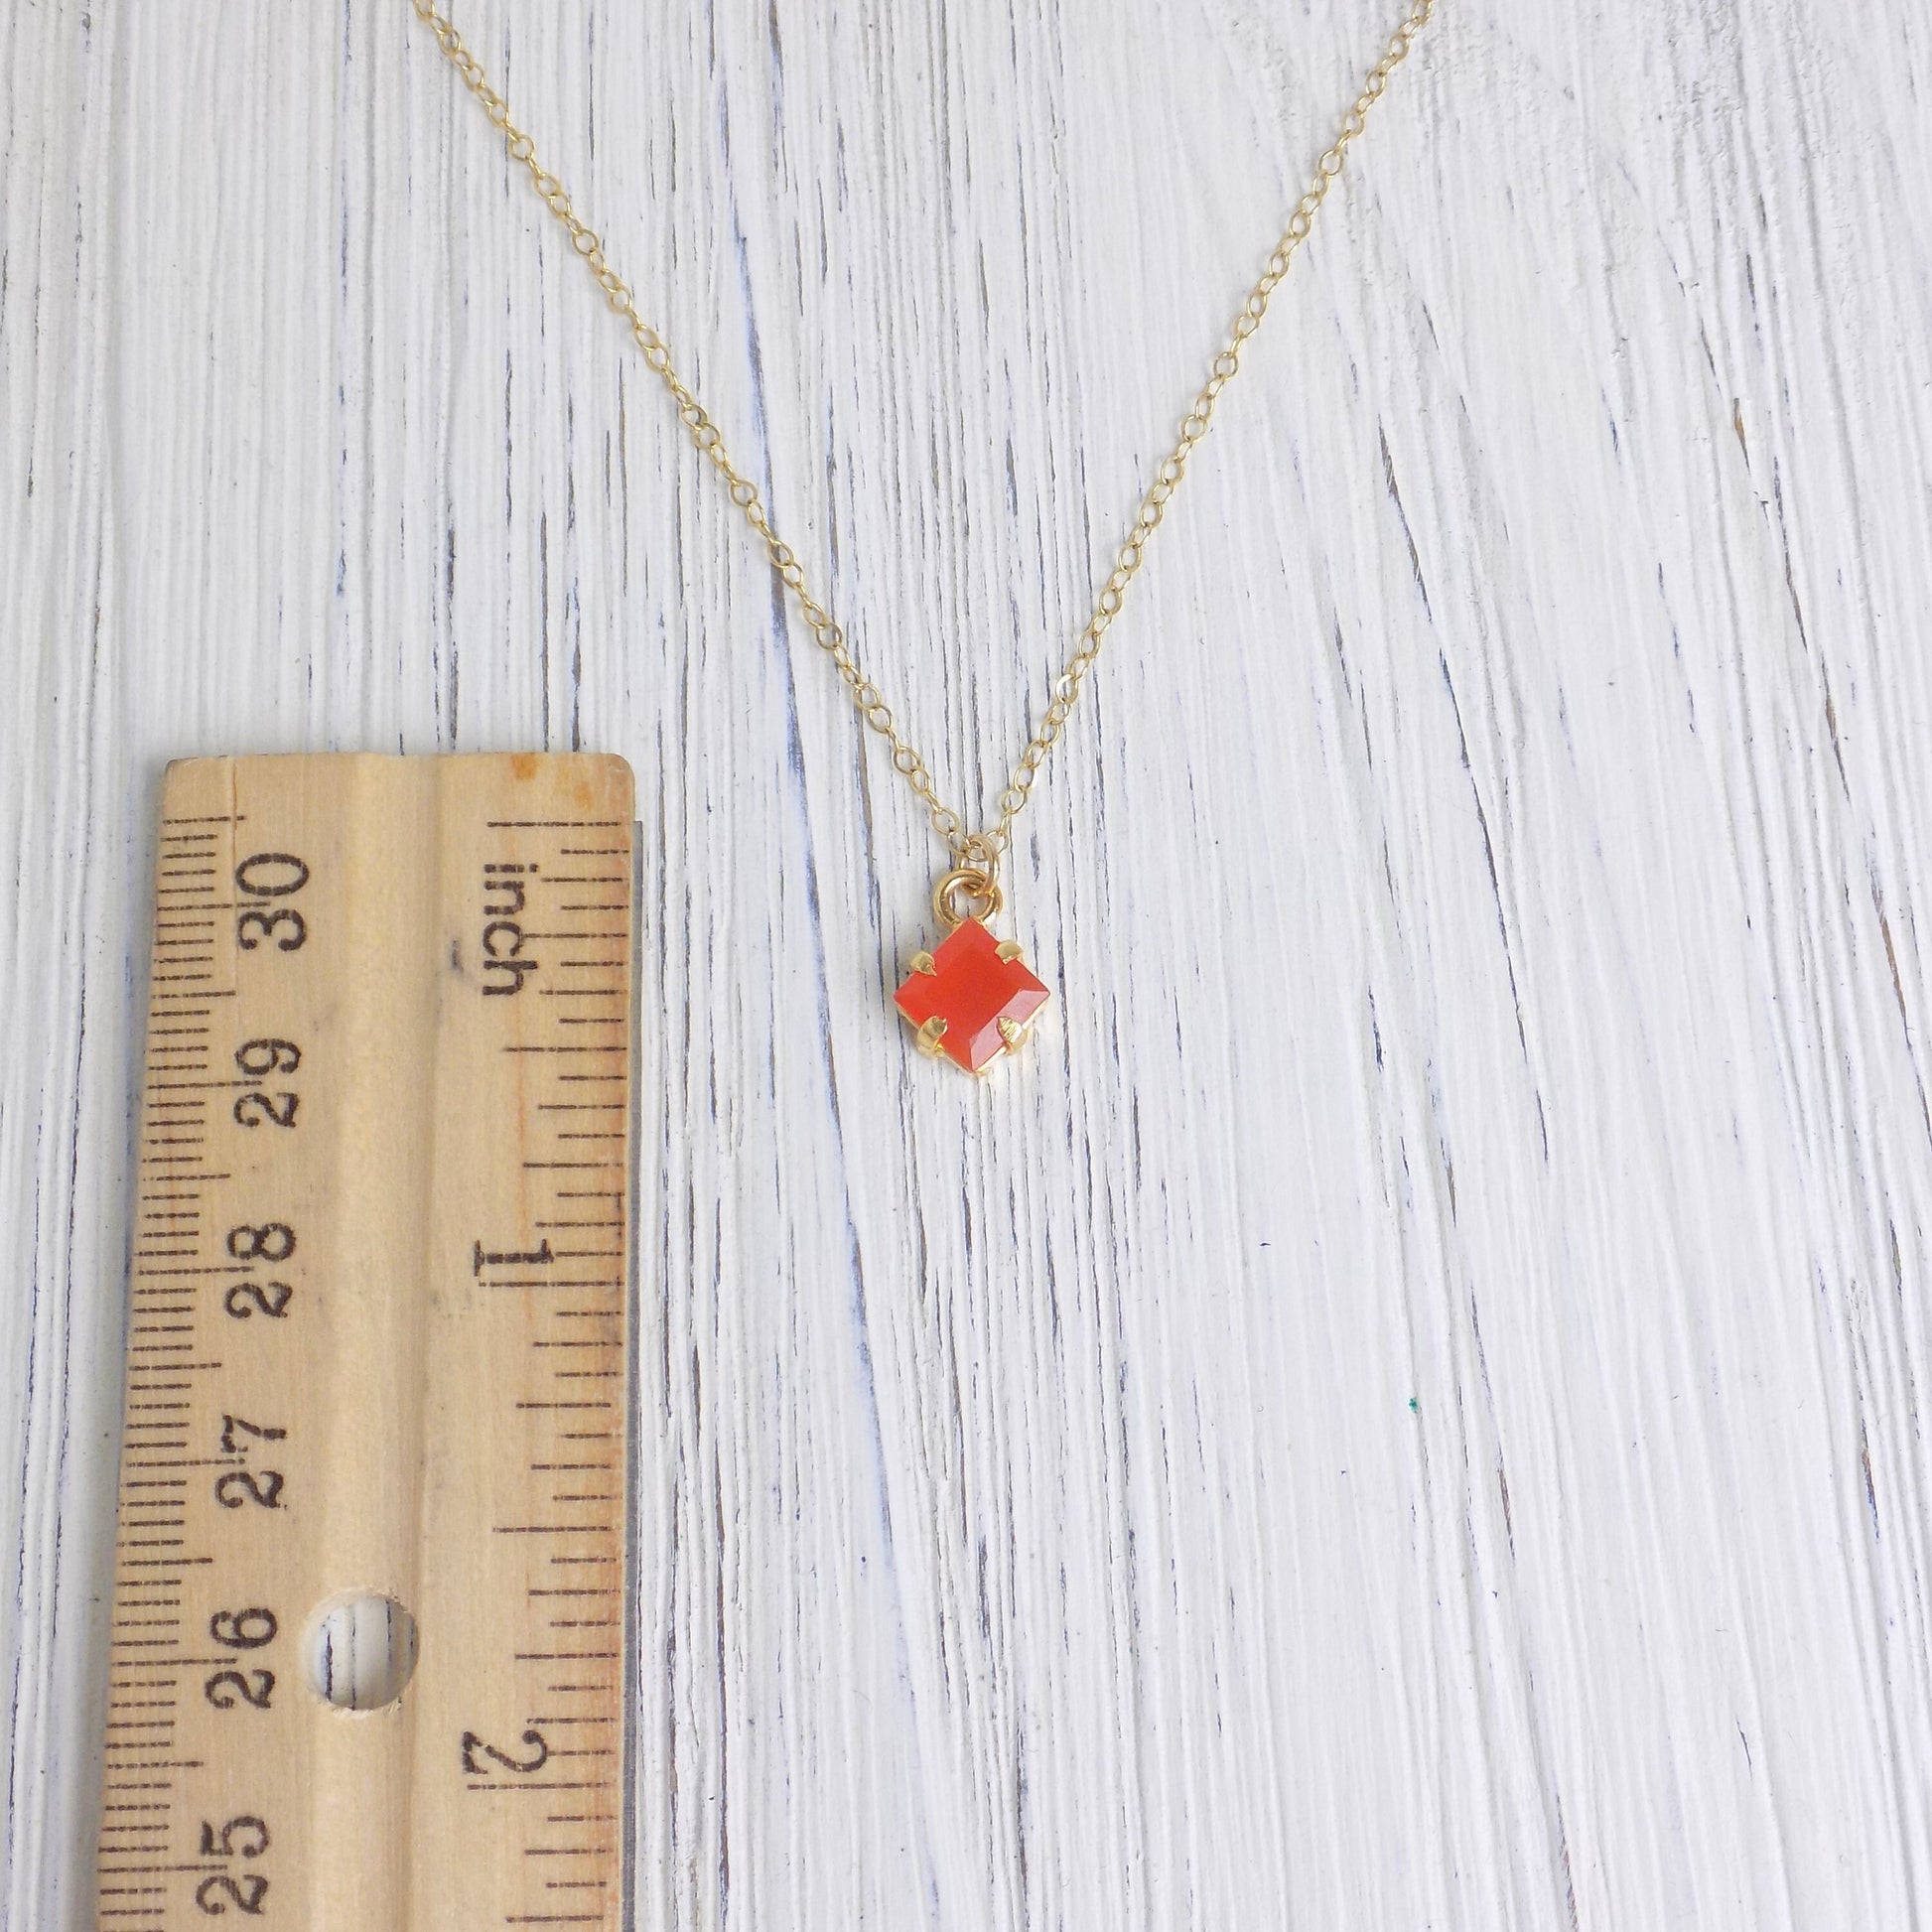 Tiny Carnelian Necklace, Orange Crystal Charm Necklace Layering, 14K Gold Filled Chain, Gift For Wife, M6-30